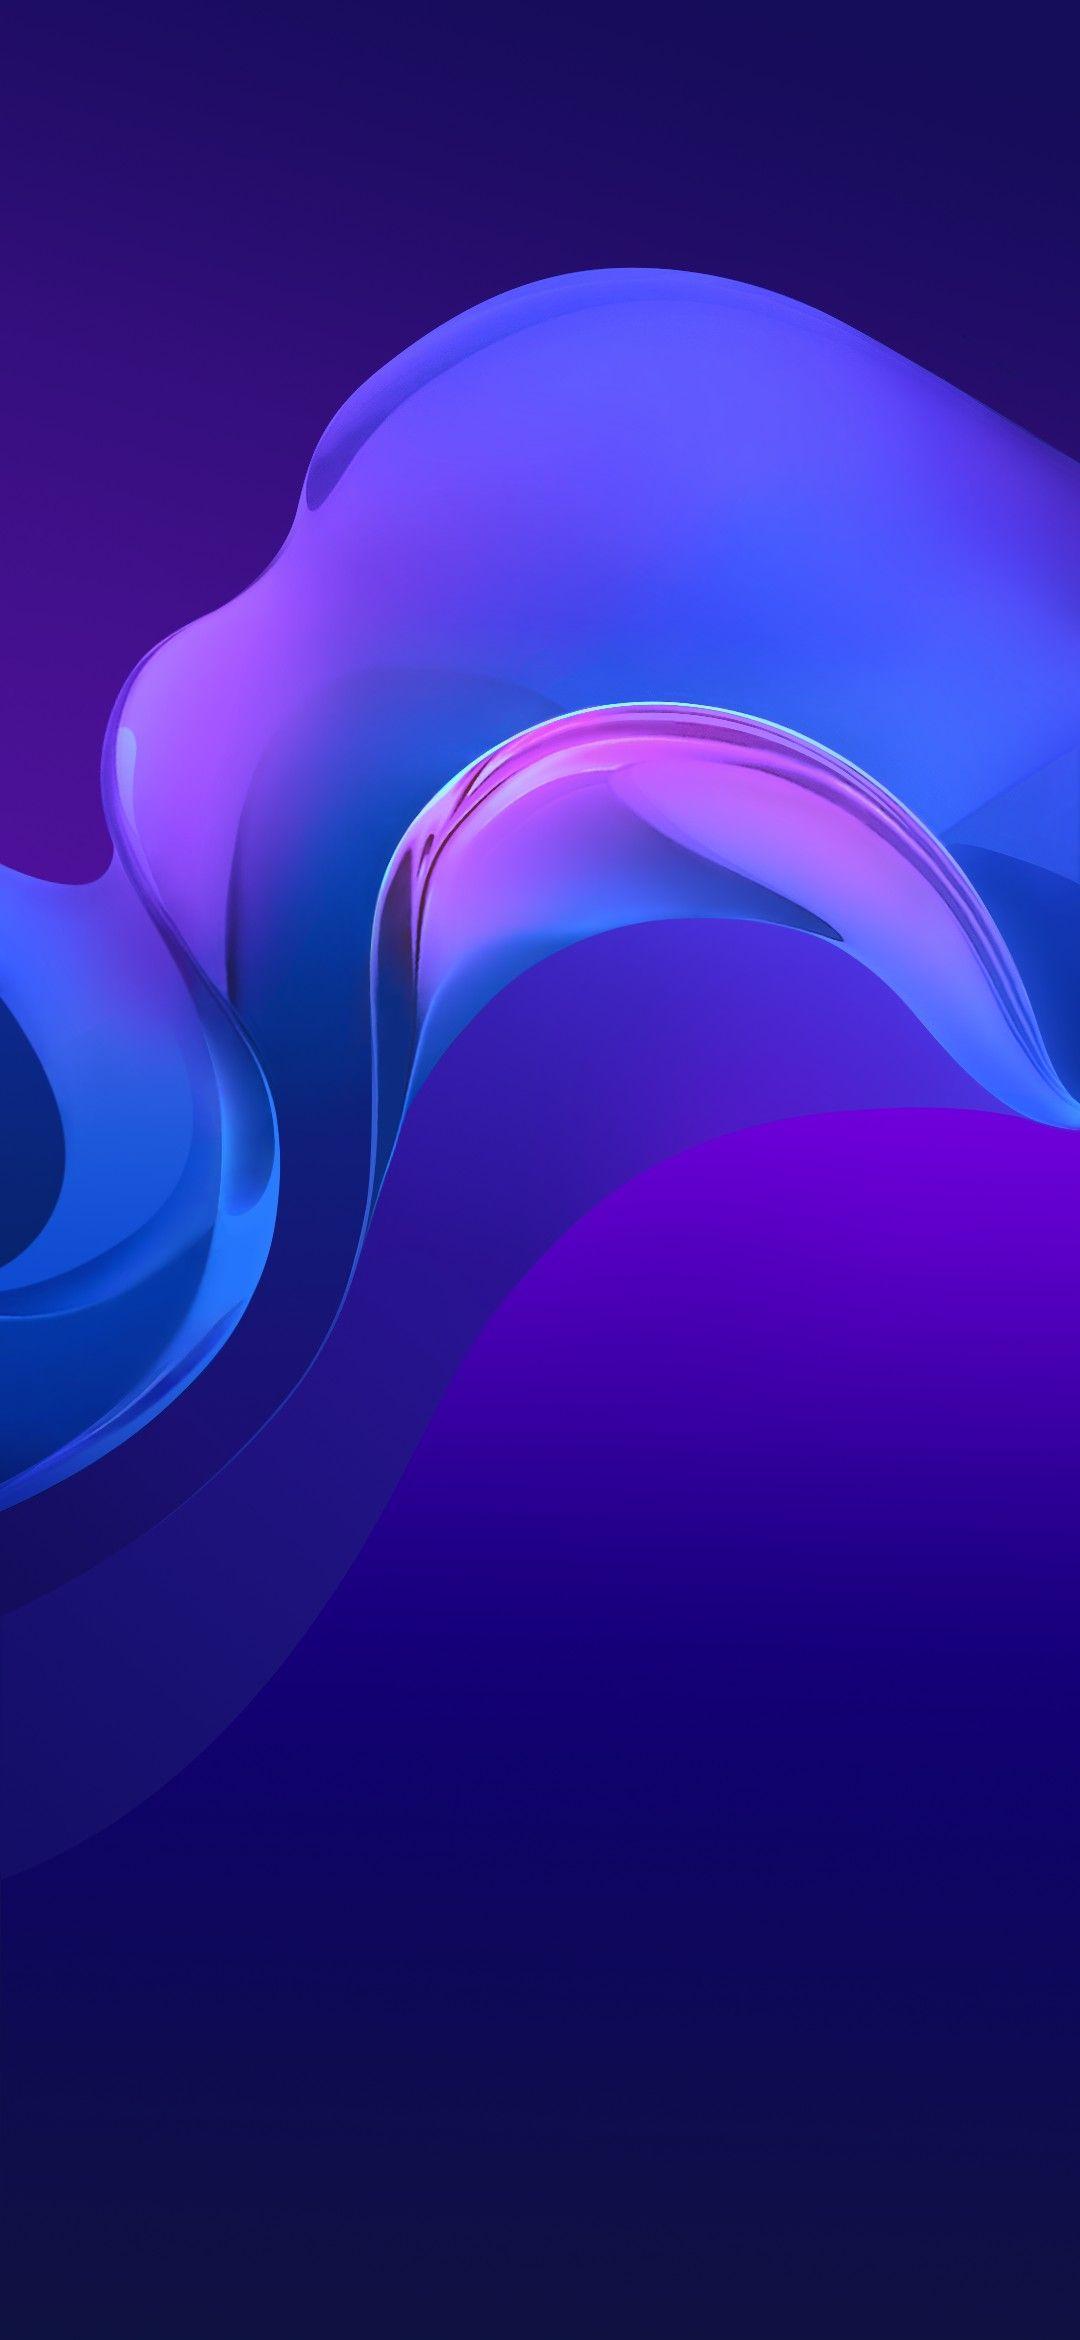 Free download Vivo x27 Abstract Amoled Liquid Gradient in 2019